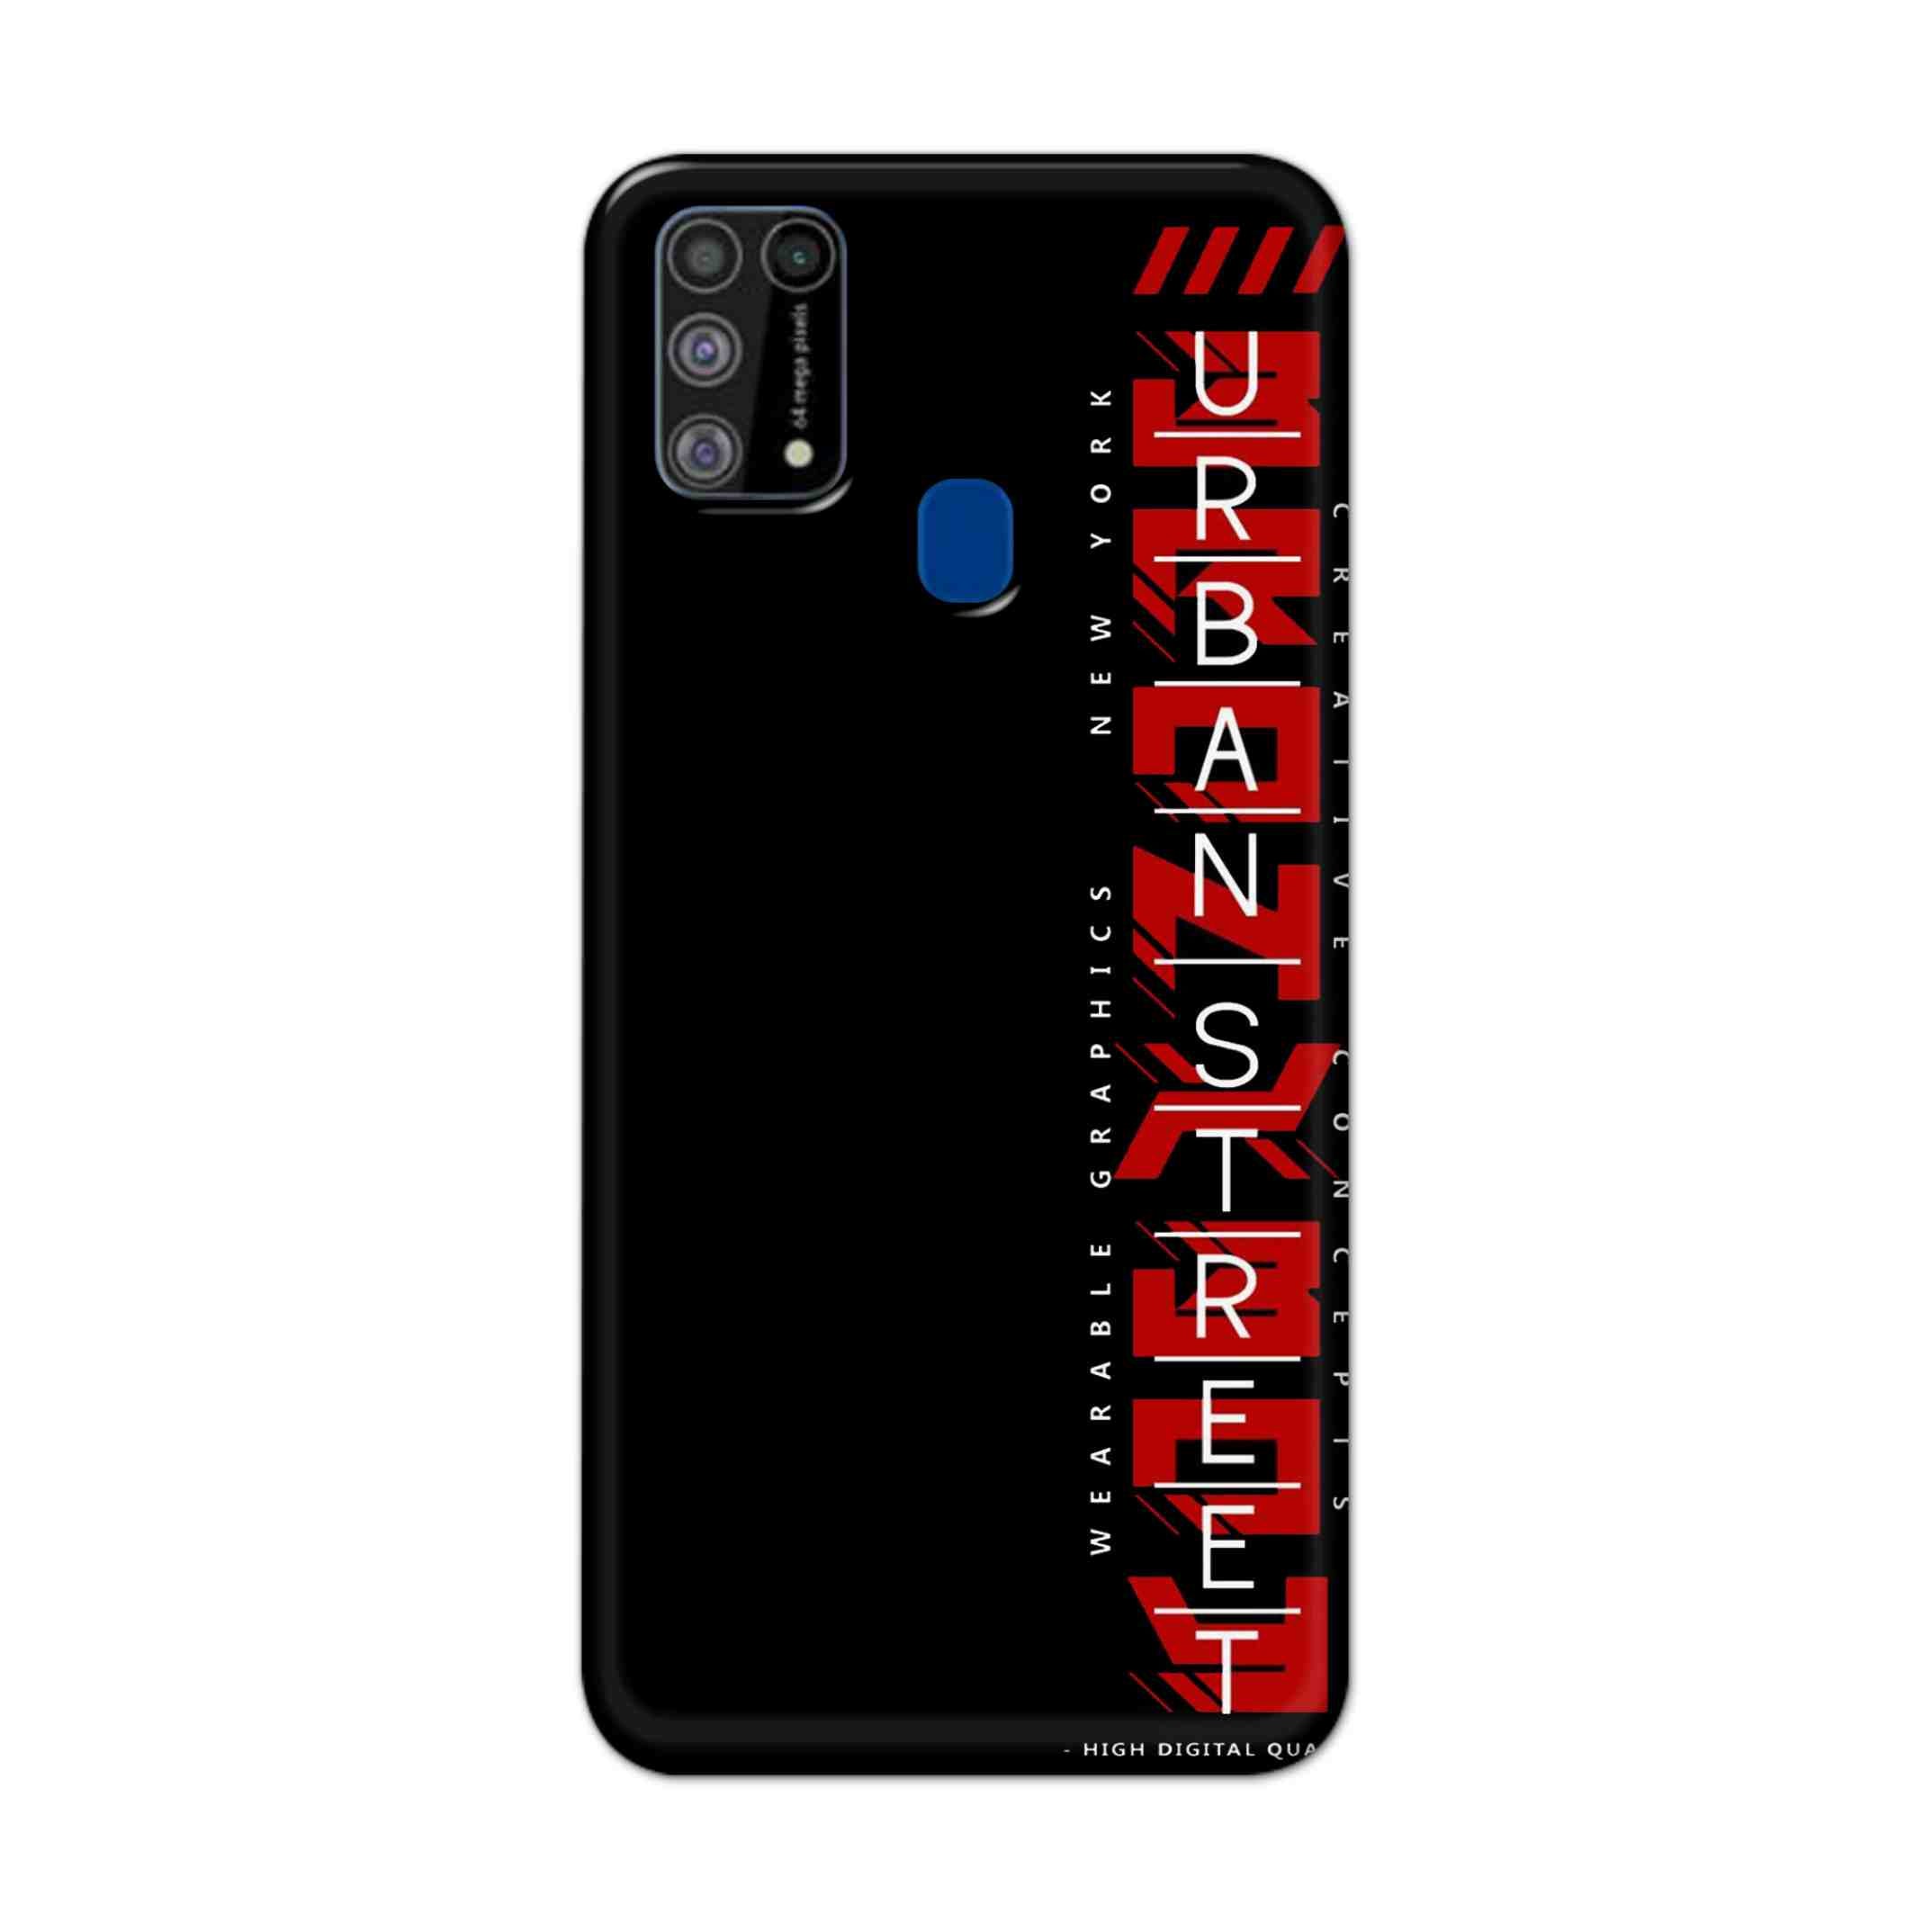 Buy Urban Street Hard Back Mobile Phone Case Cover For Samsung Galaxy M31 Online